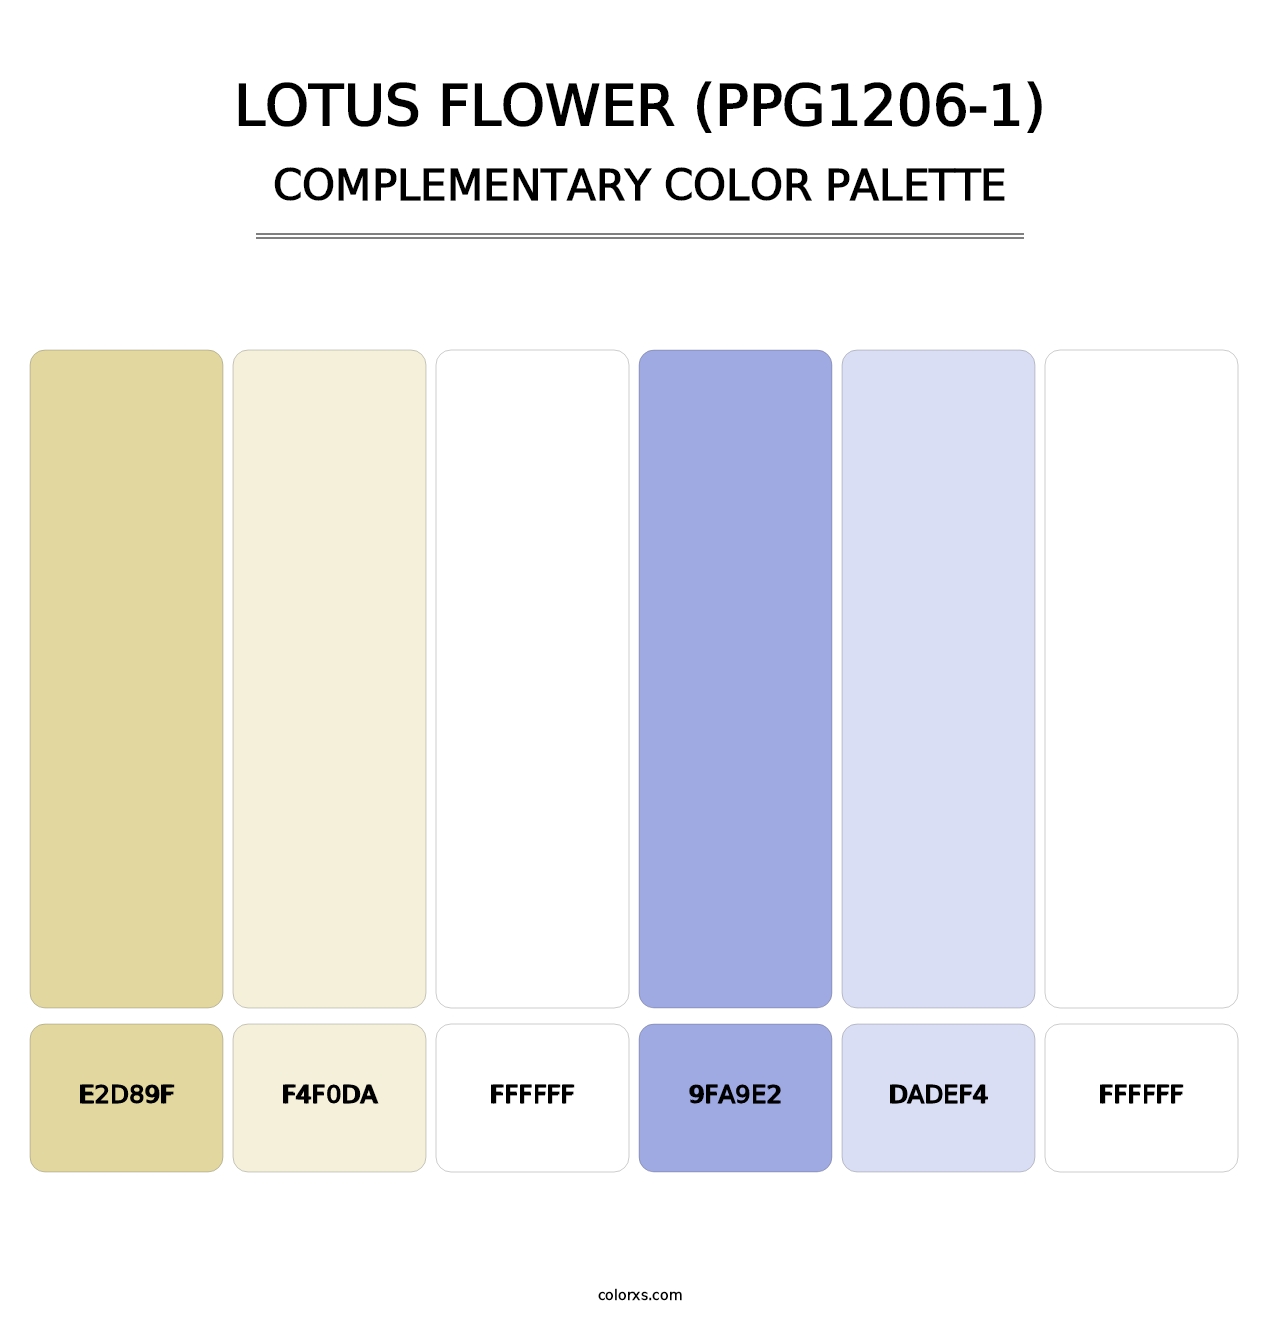 Lotus Flower (PPG1206-1) - Complementary Color Palette